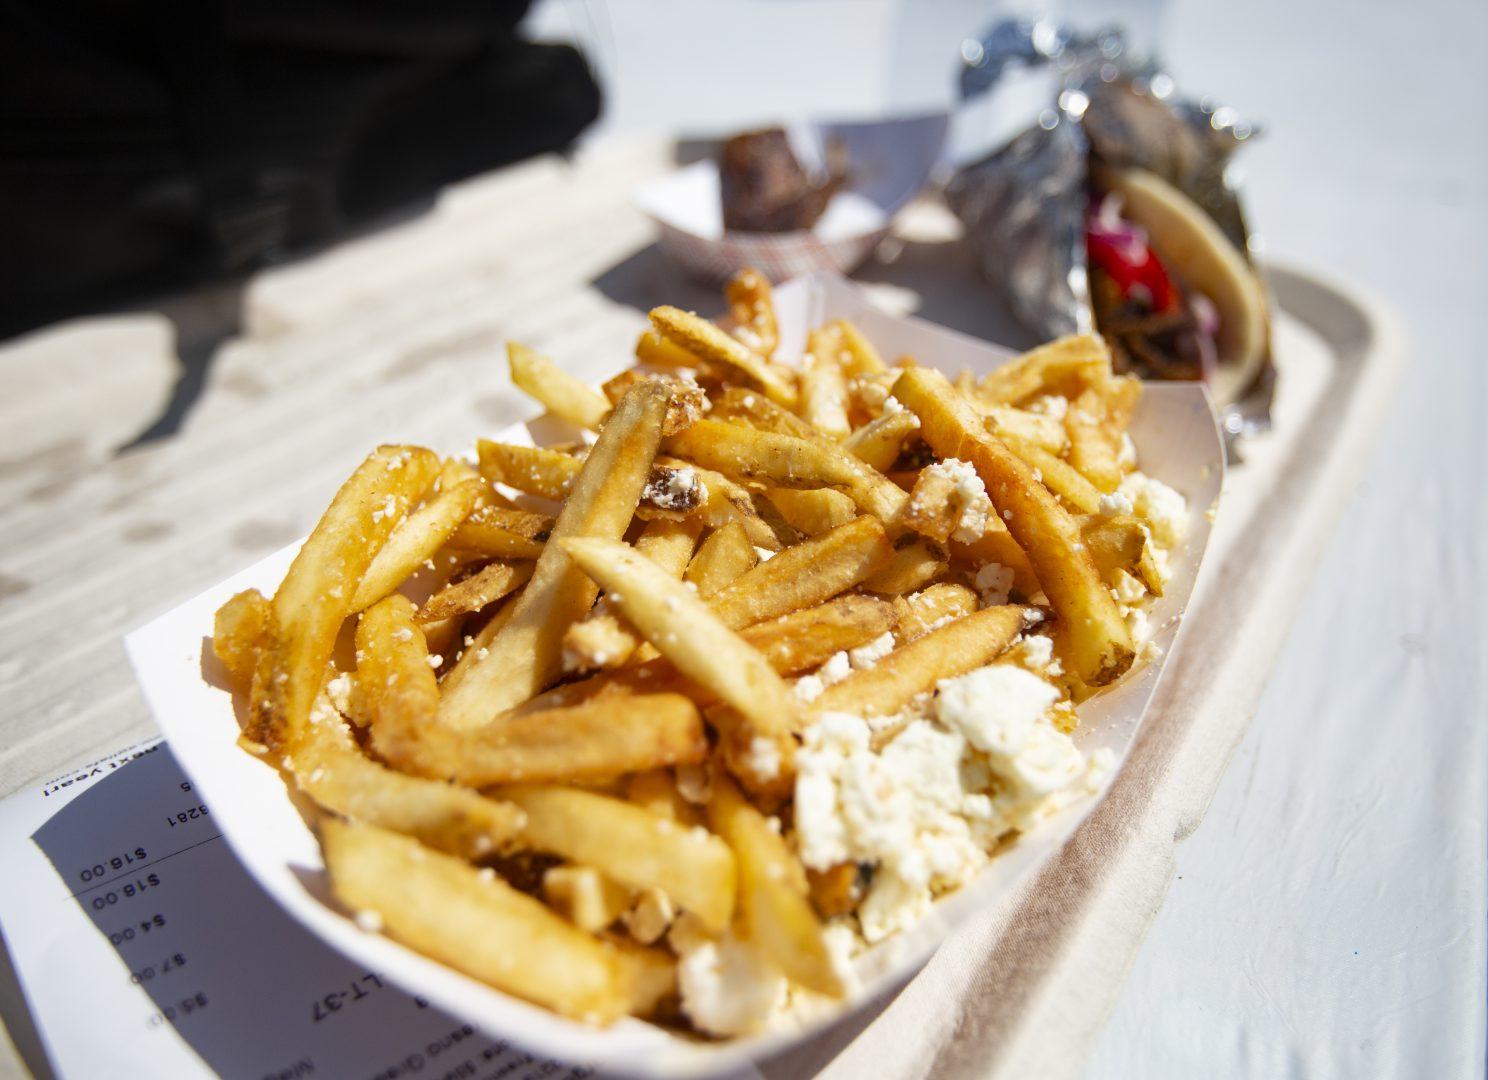 Feta fries was one of the Greek food items guests could buy during the 59th annual Fresno Greek Fest on Saturday, Aug. 24, 2019.  (Larry Valenzuela/The Collegian)